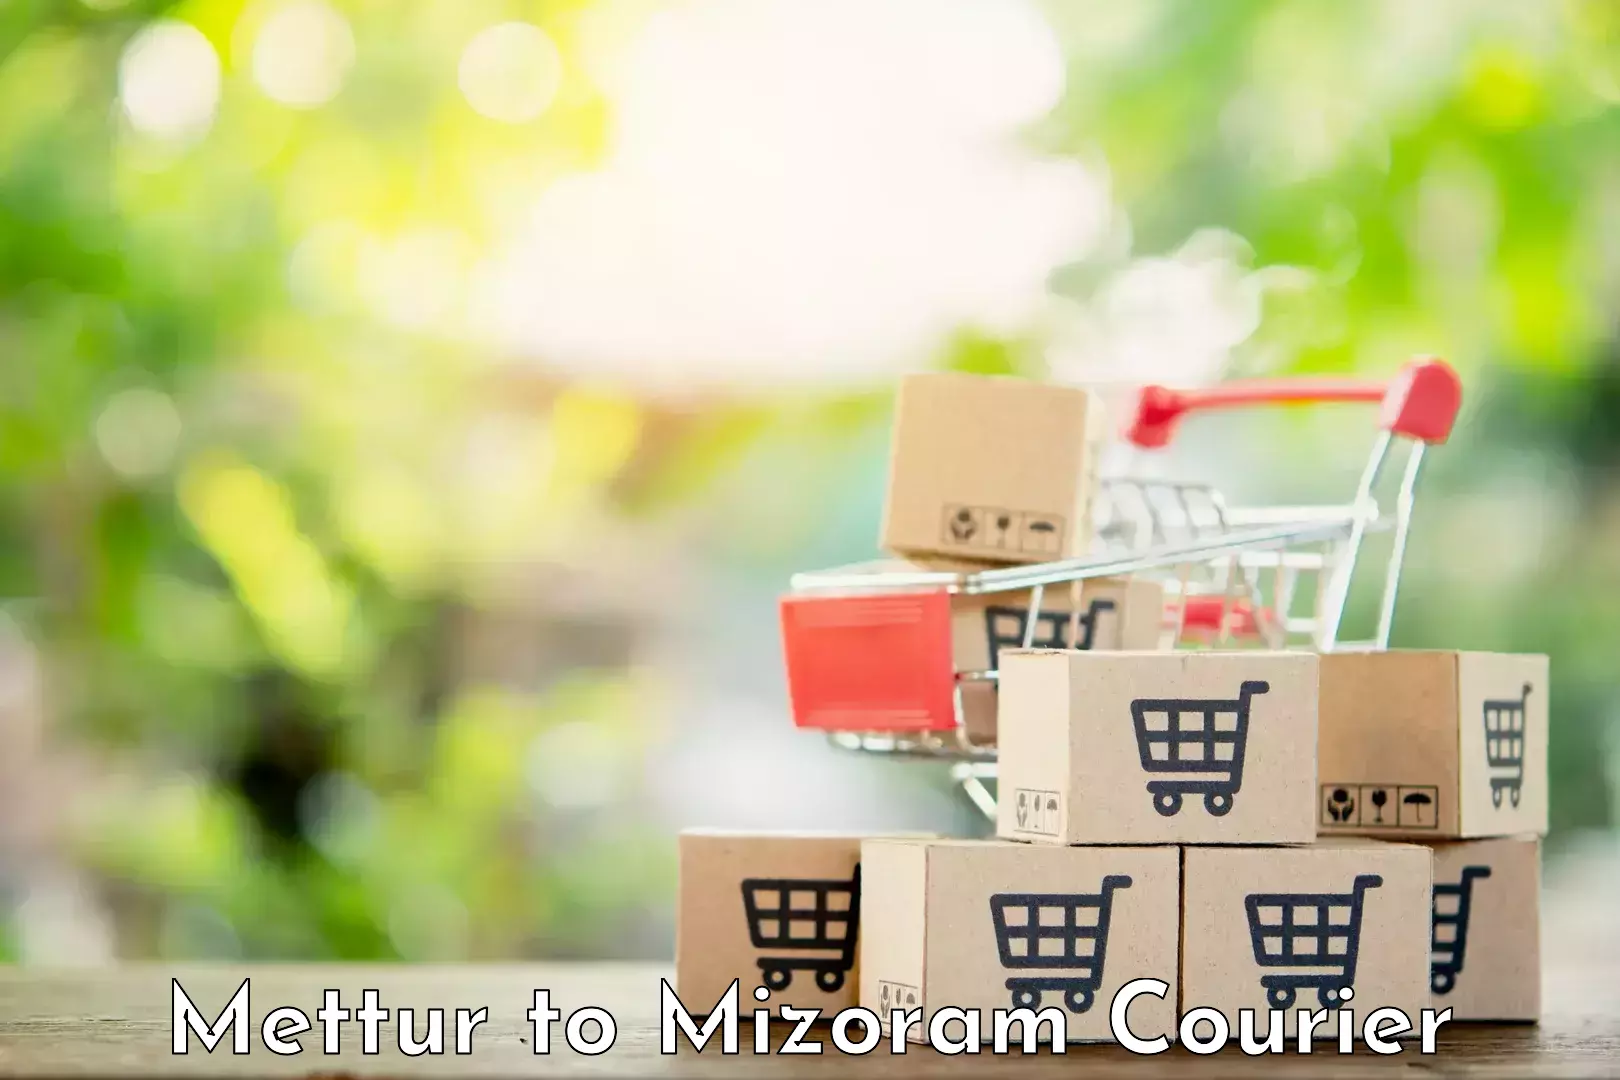 Subscription-based courier Mettur to Aizawl